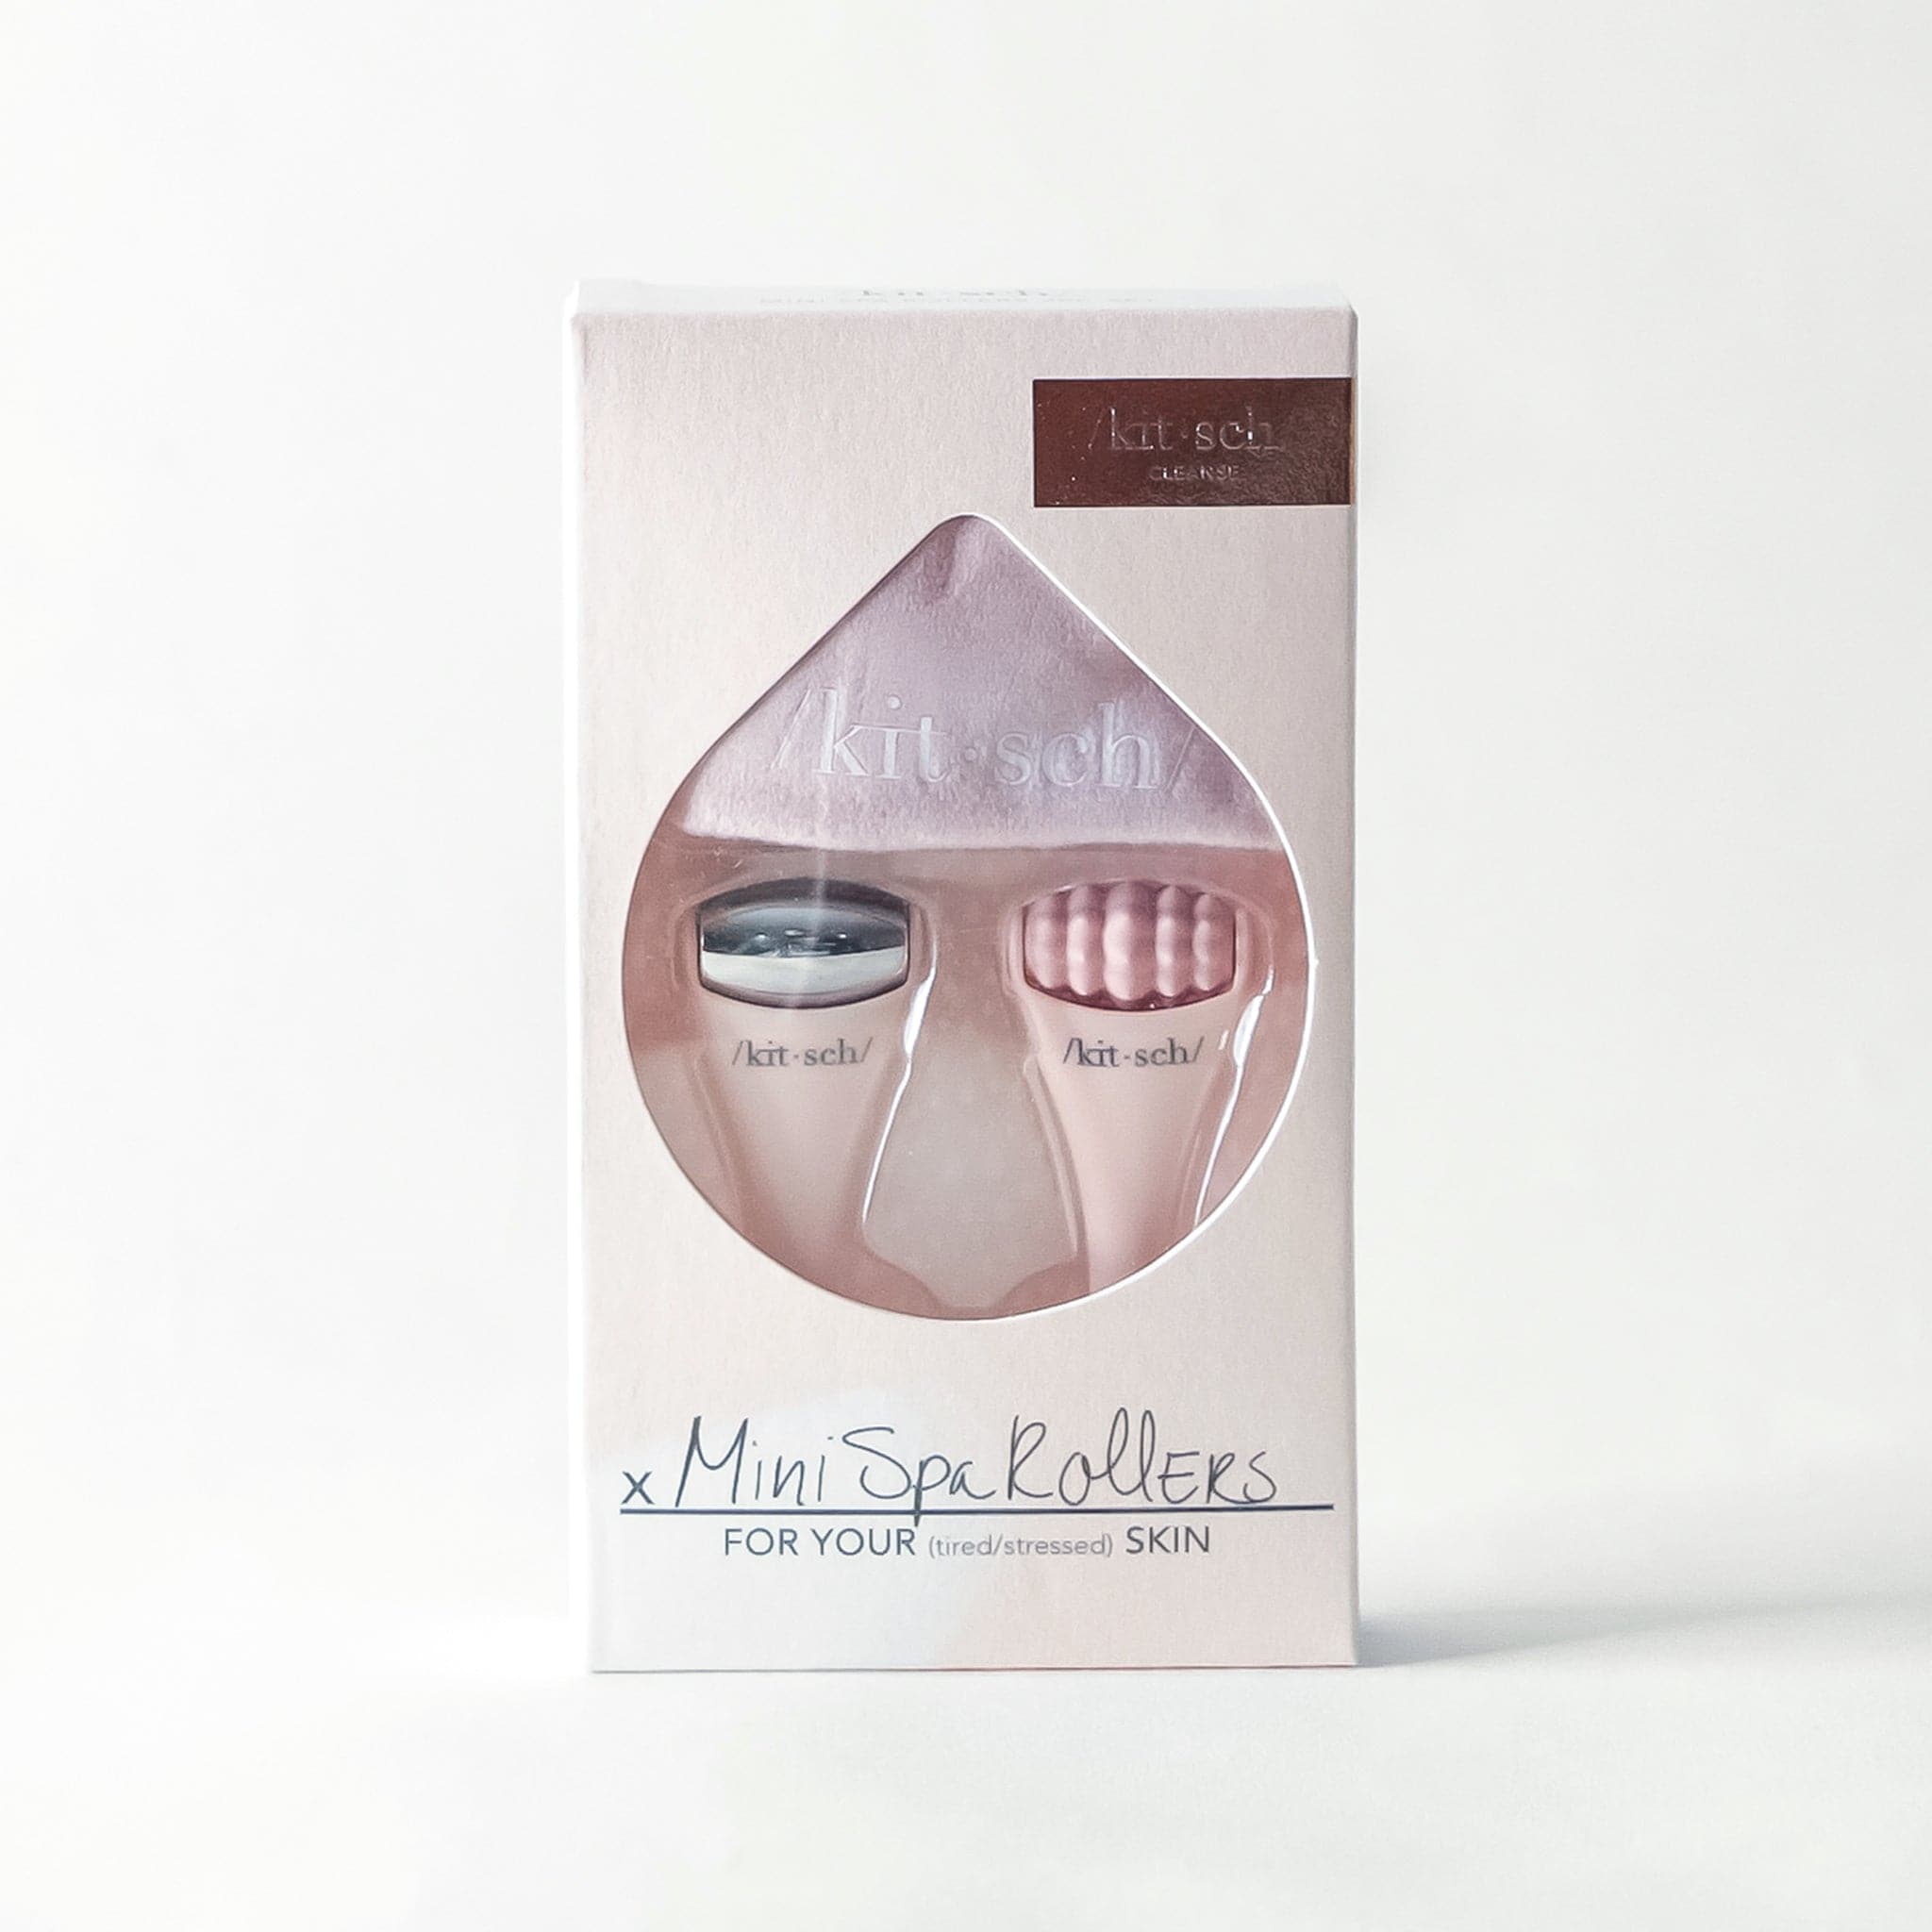 On a white background is a light pink packaging holding two mini facial massage tools. One with a smooth stainless steel roller and the other with a more textured light pink roller. 